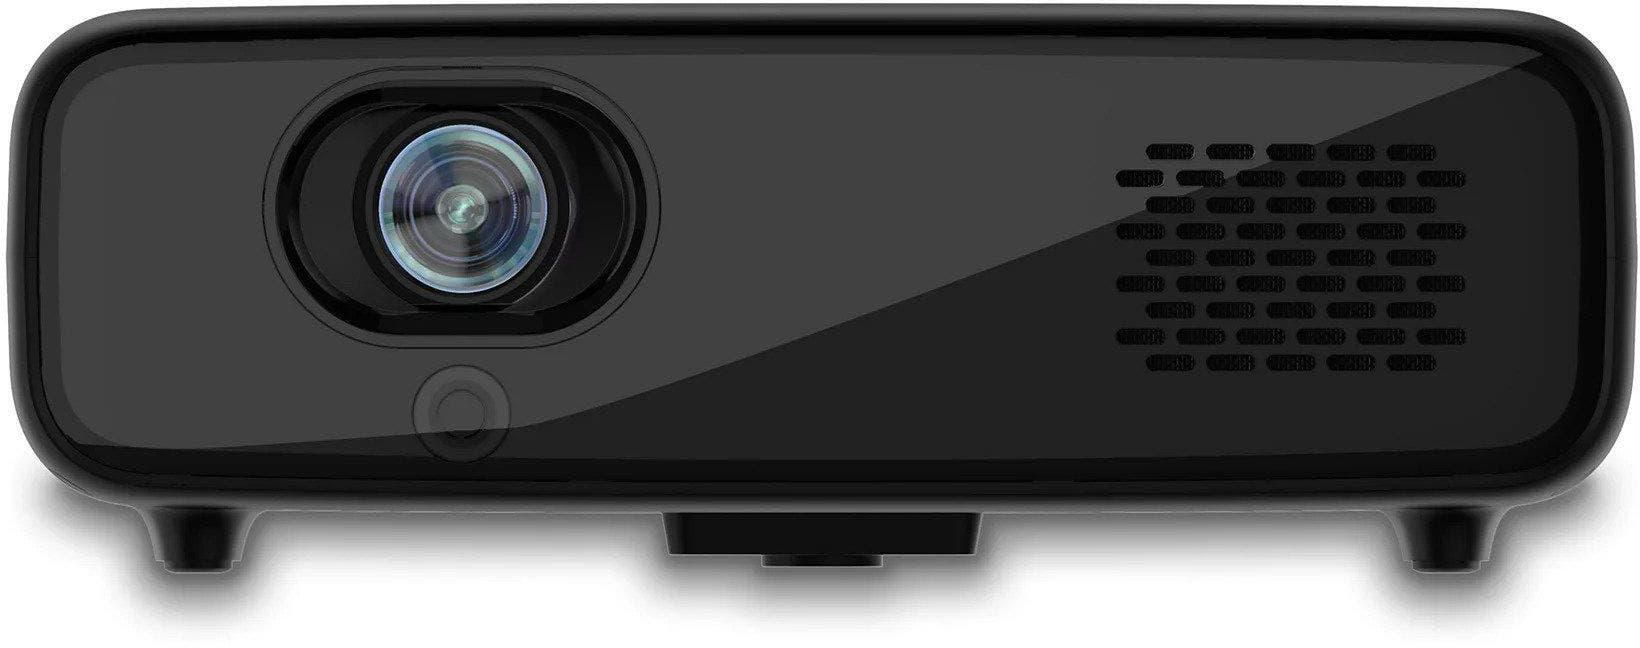 Philips PPX520 PicoPix Max One Mobile Projector